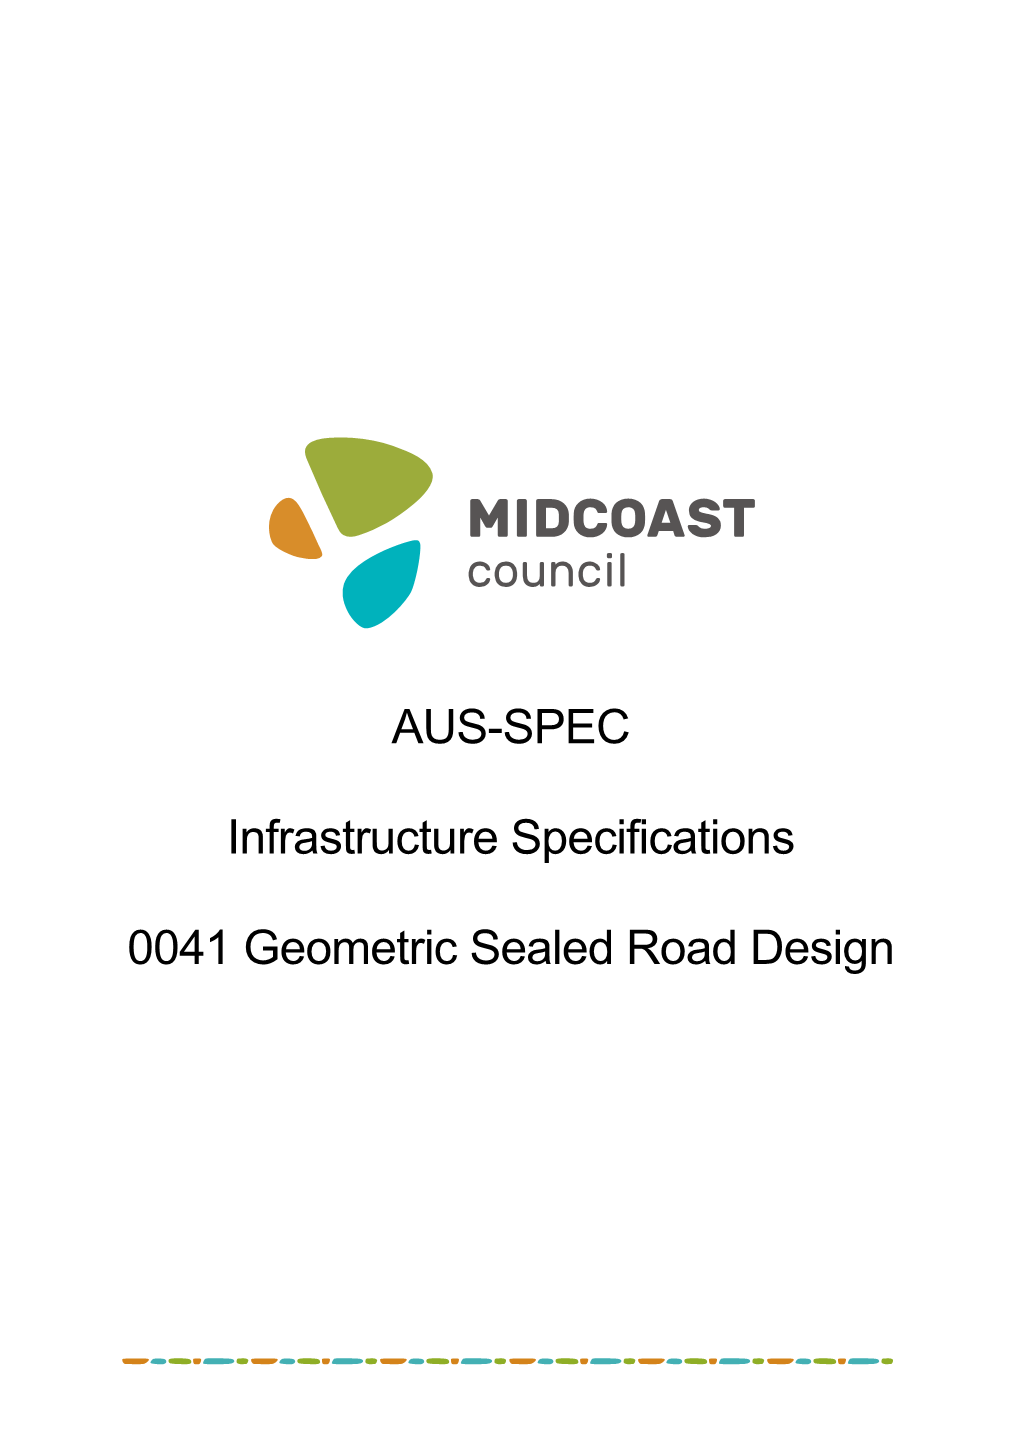 AUS-SPEC Infrastructure Specifications 0041 Geometric Sealed Road Design